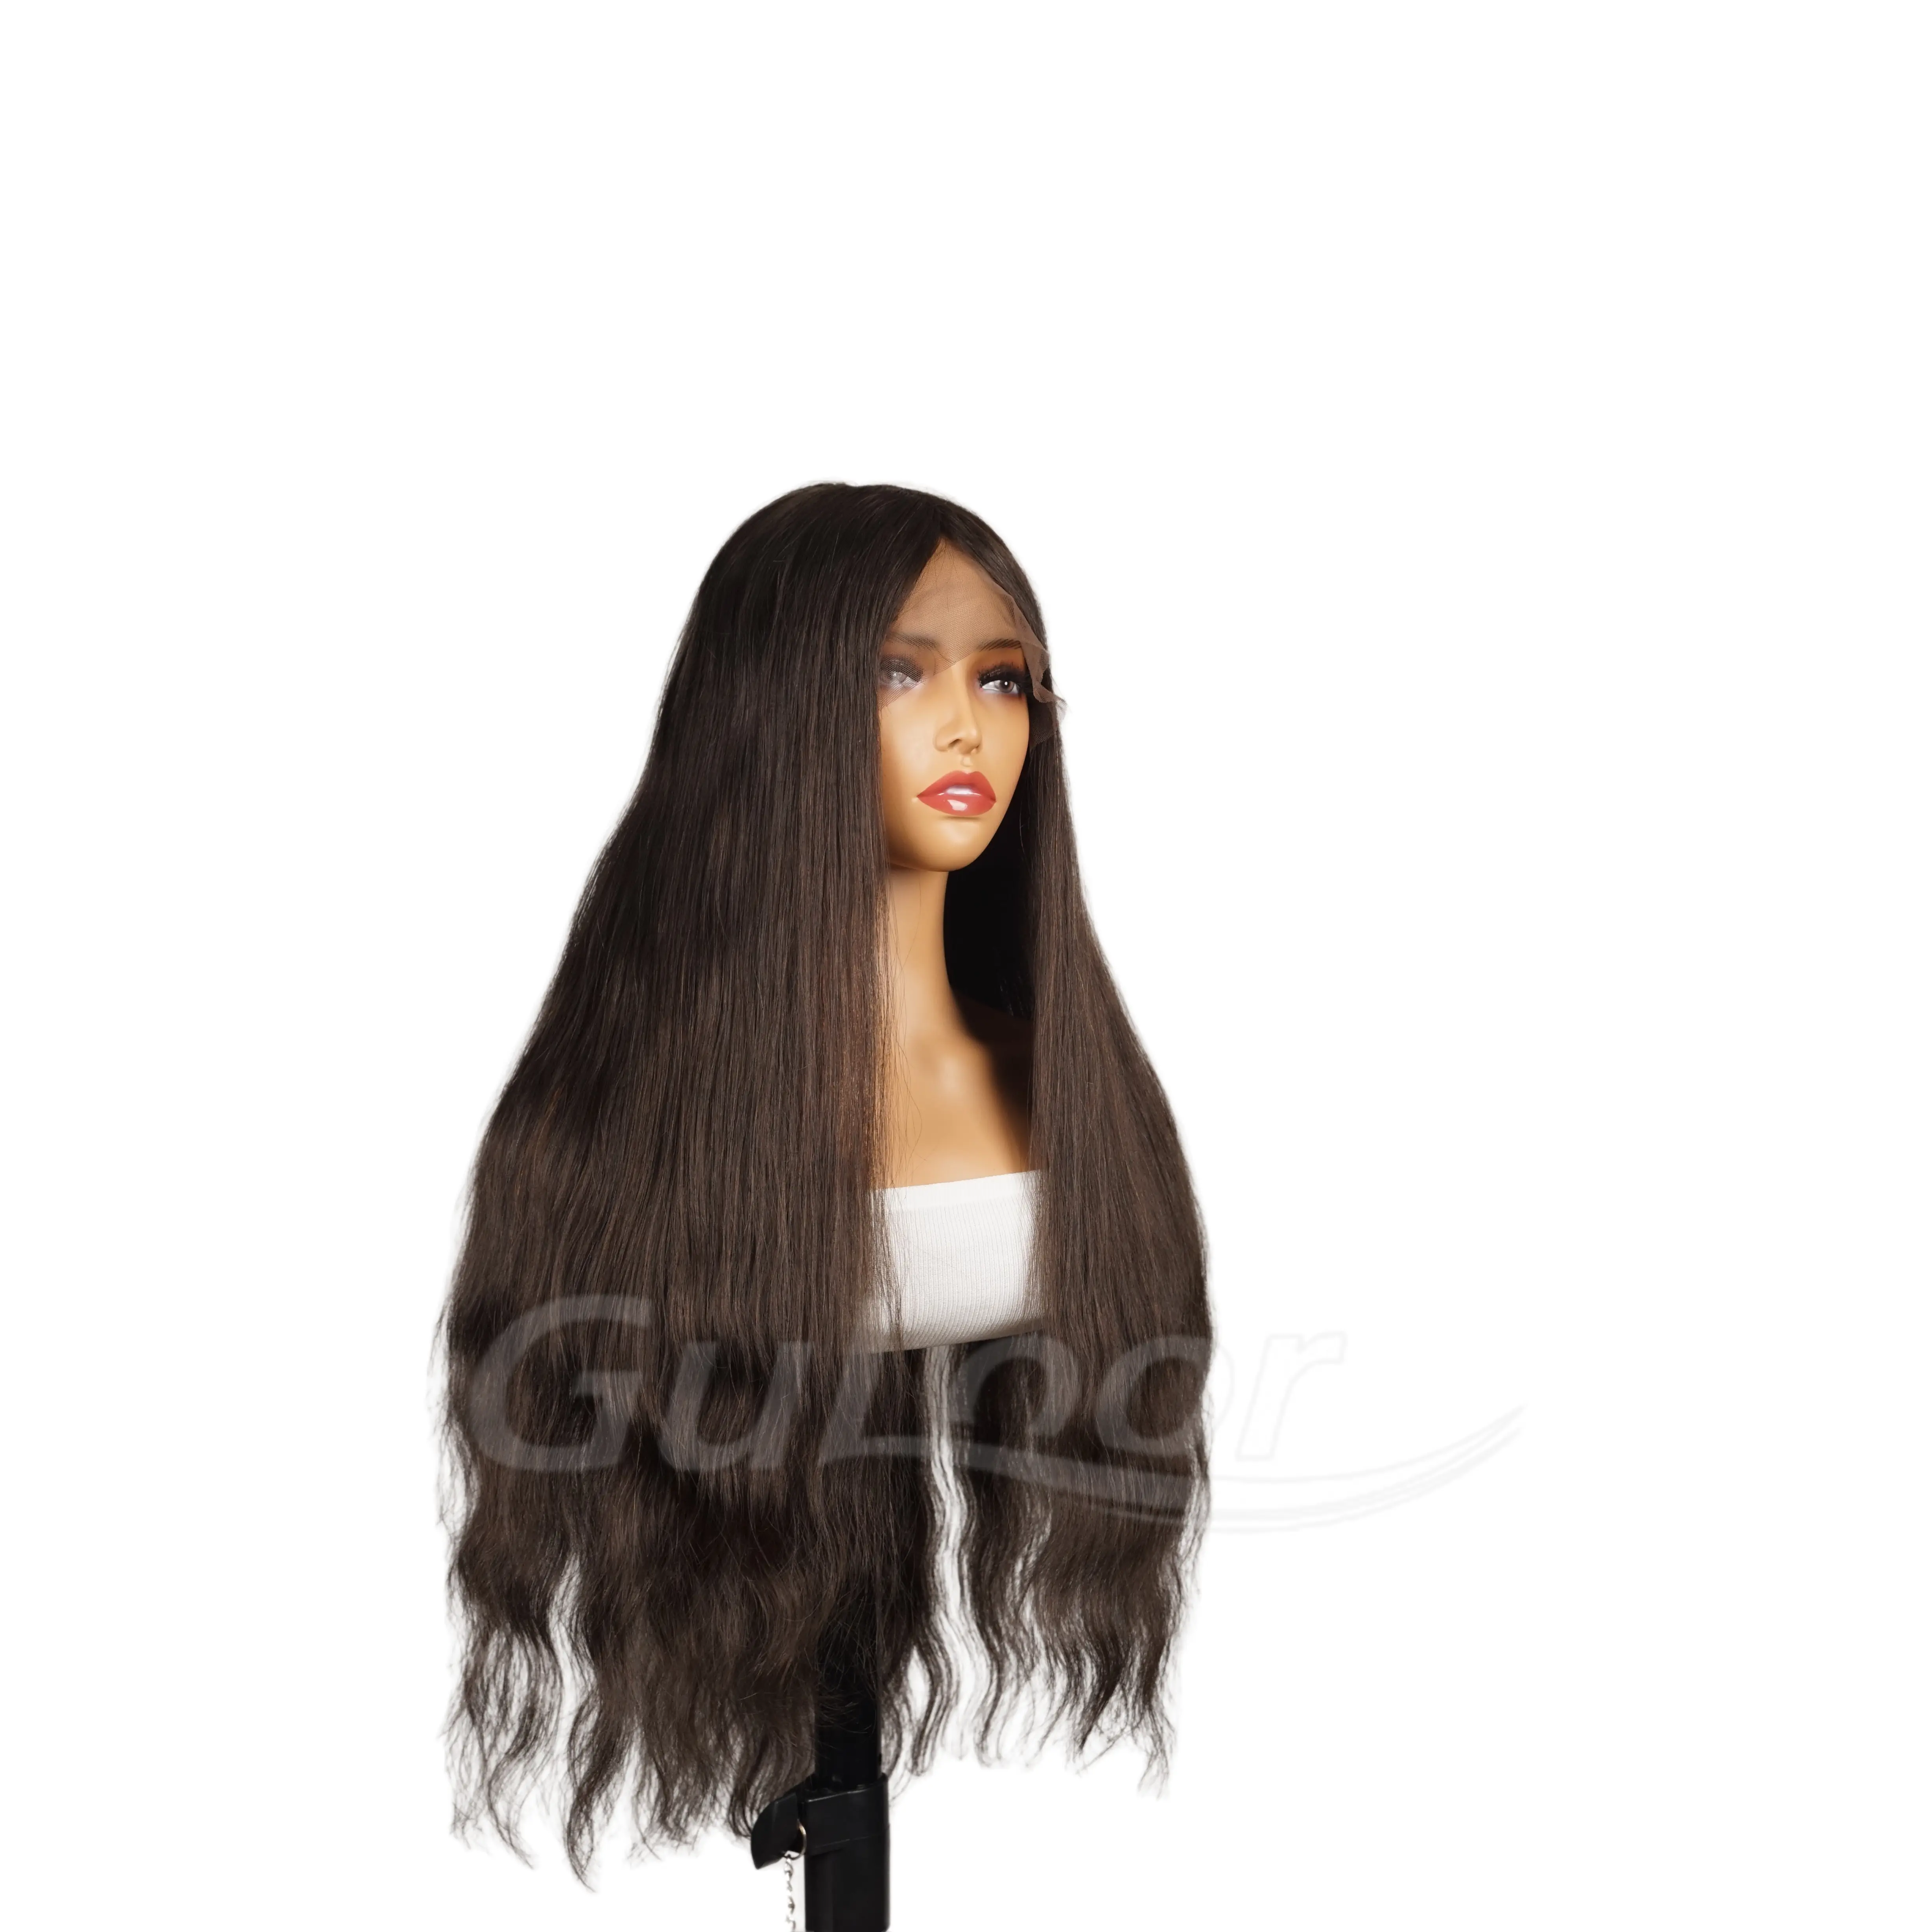 FULL LACE WIG COLOR #2 HAIR LENGTH 28 INCHES